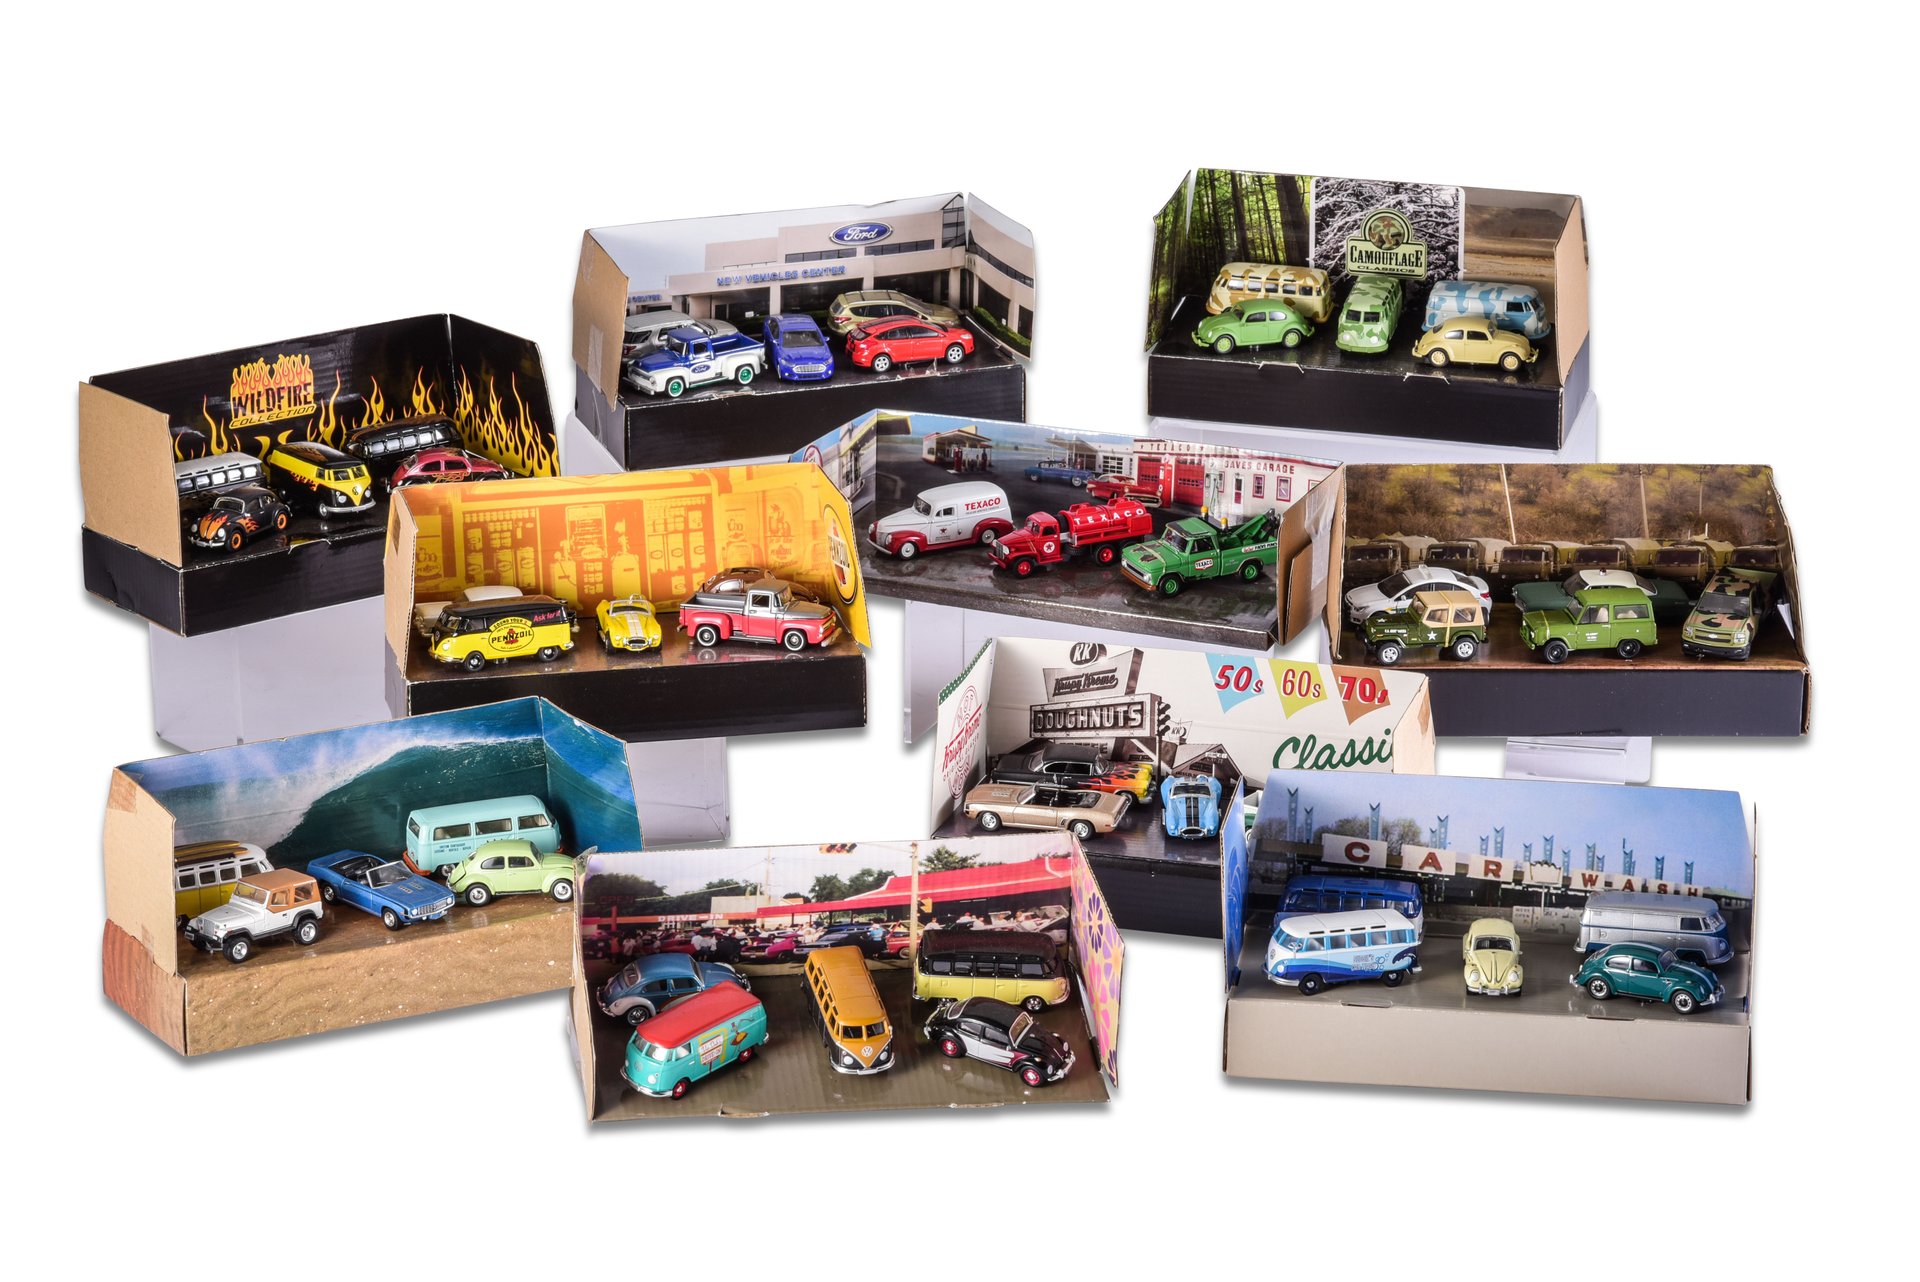 For Sale Group of Cars Models in Cutout Box Displays